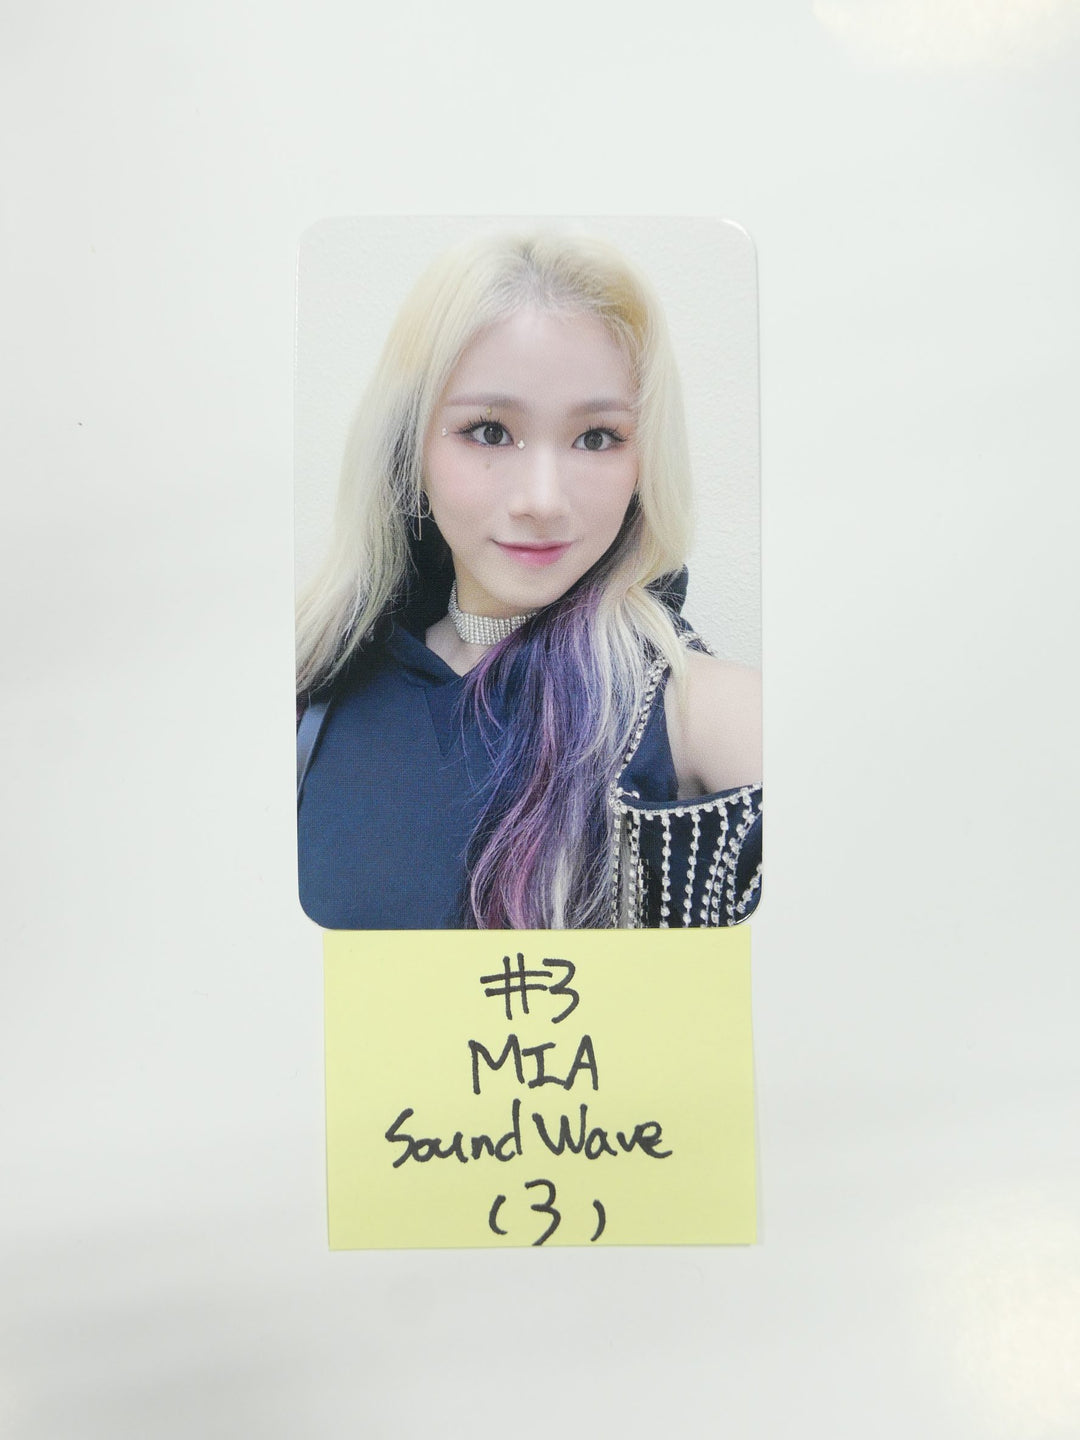 Everglow 'Return of The Girl' - Soundwave Fansign Event Photocard